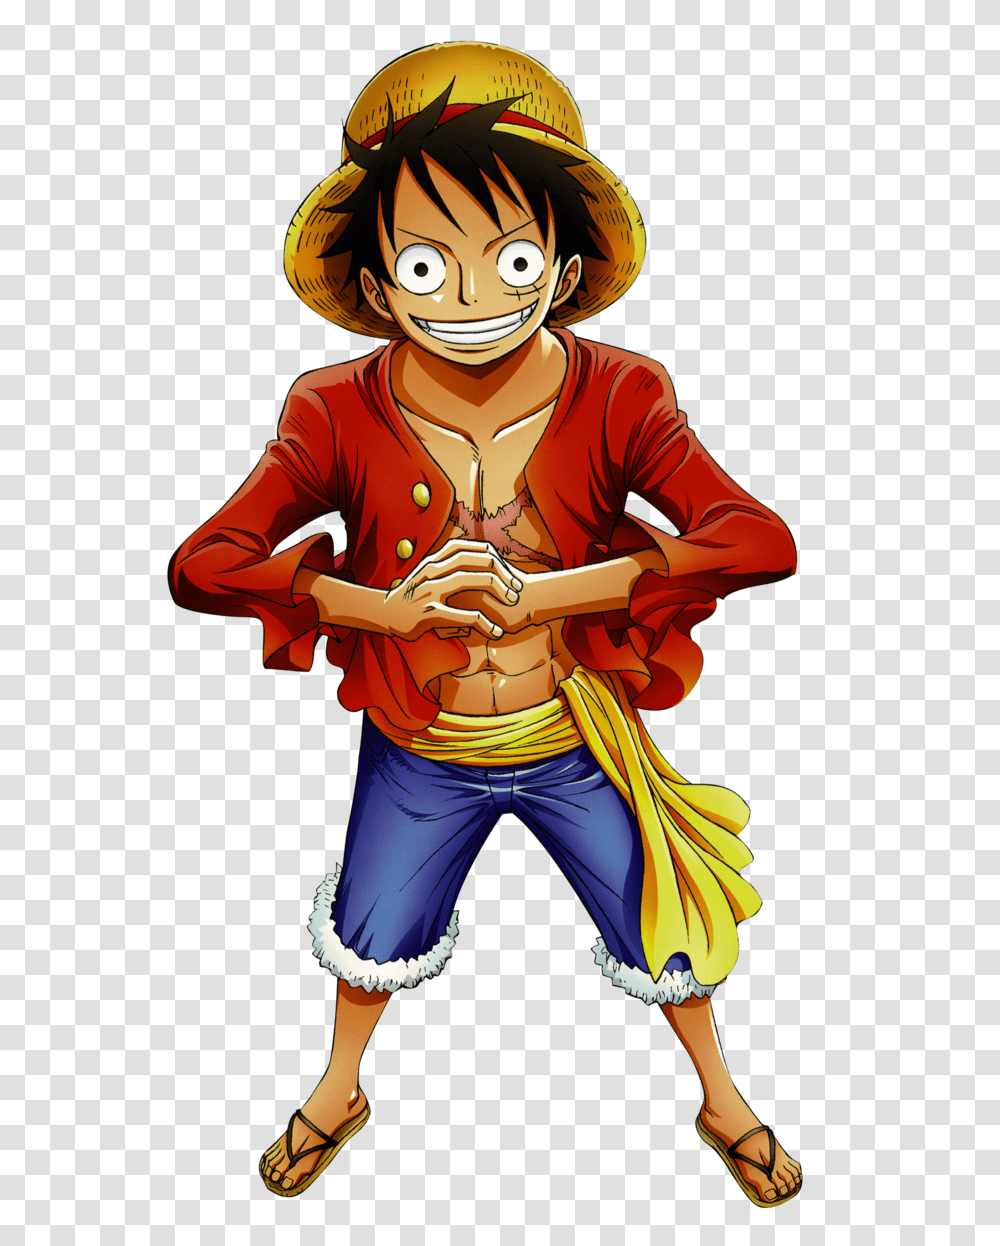 Luffy One Piece Image, Comics, Book, Manga, Person Transparent Png